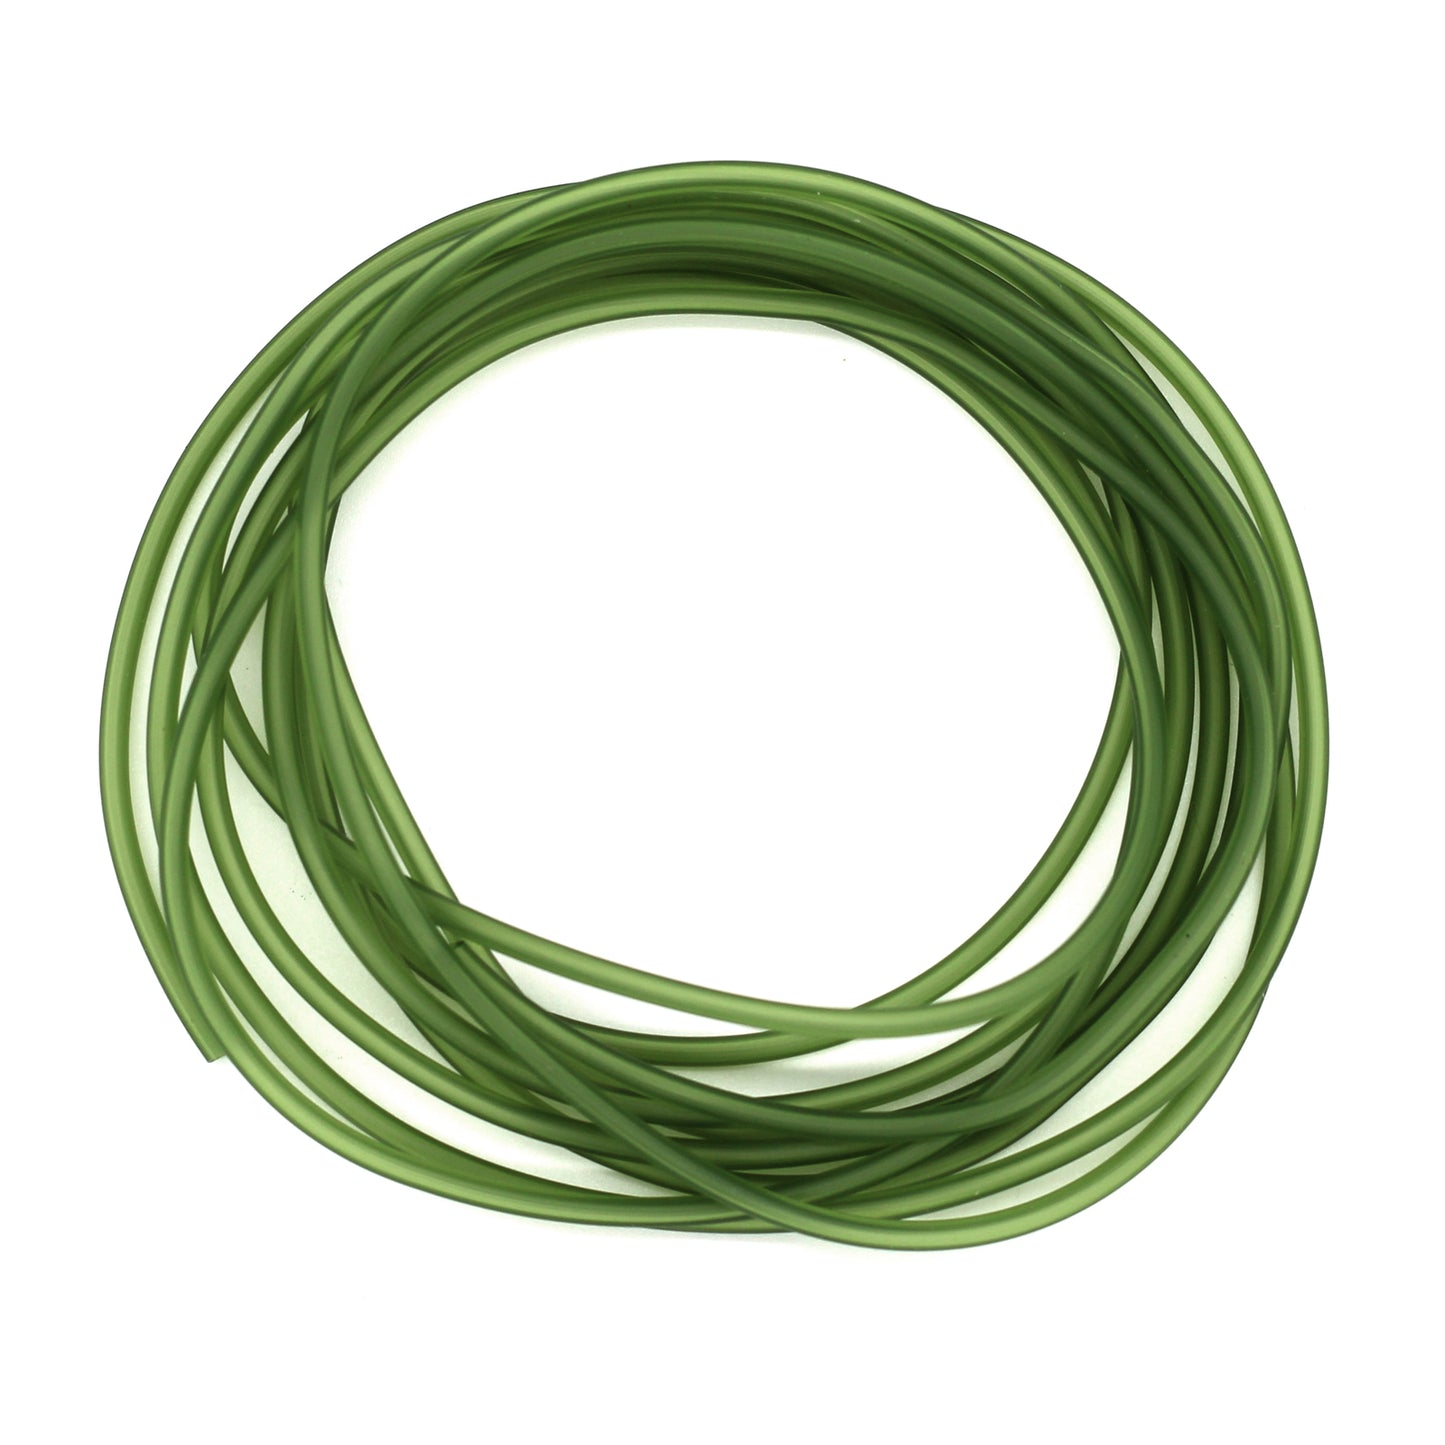 Deception Angling Silicon Tubing for Fishing in Trans Green